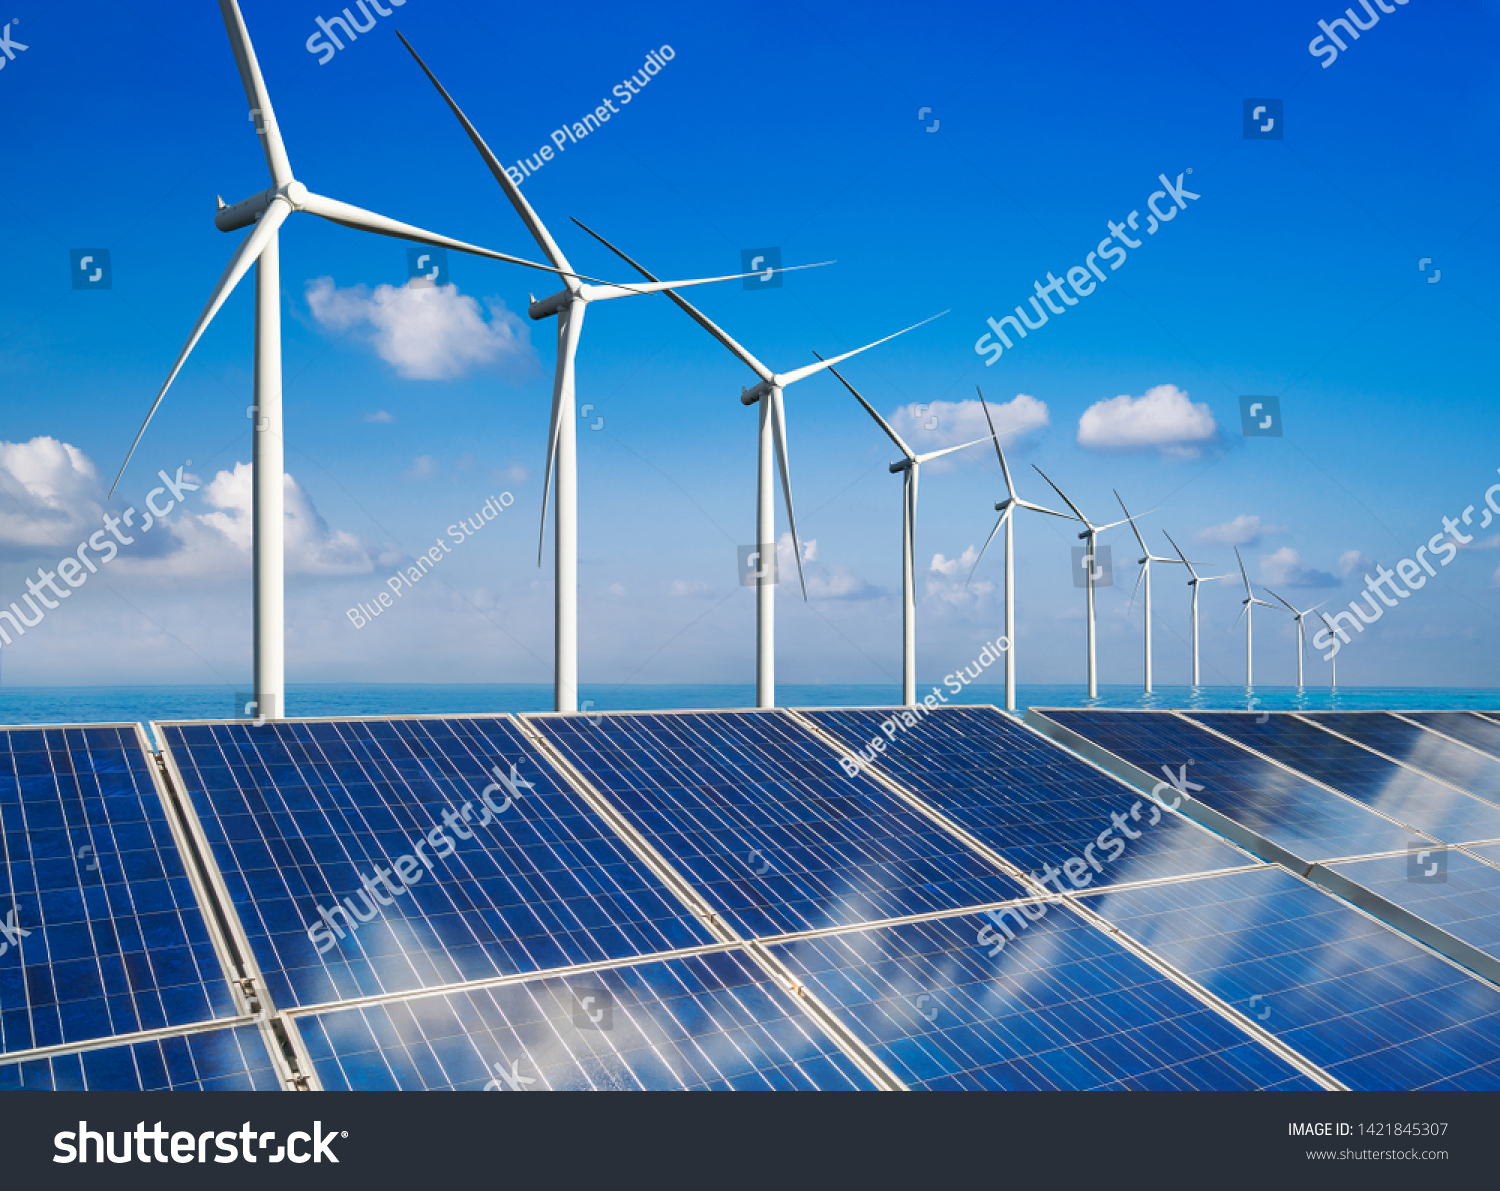 Solar energy panel photovoltaic cell and wind turbine farm power generator in nature landscape for production of renewable green energy is friendly industry. Clean sustainable development concept. #1421845307